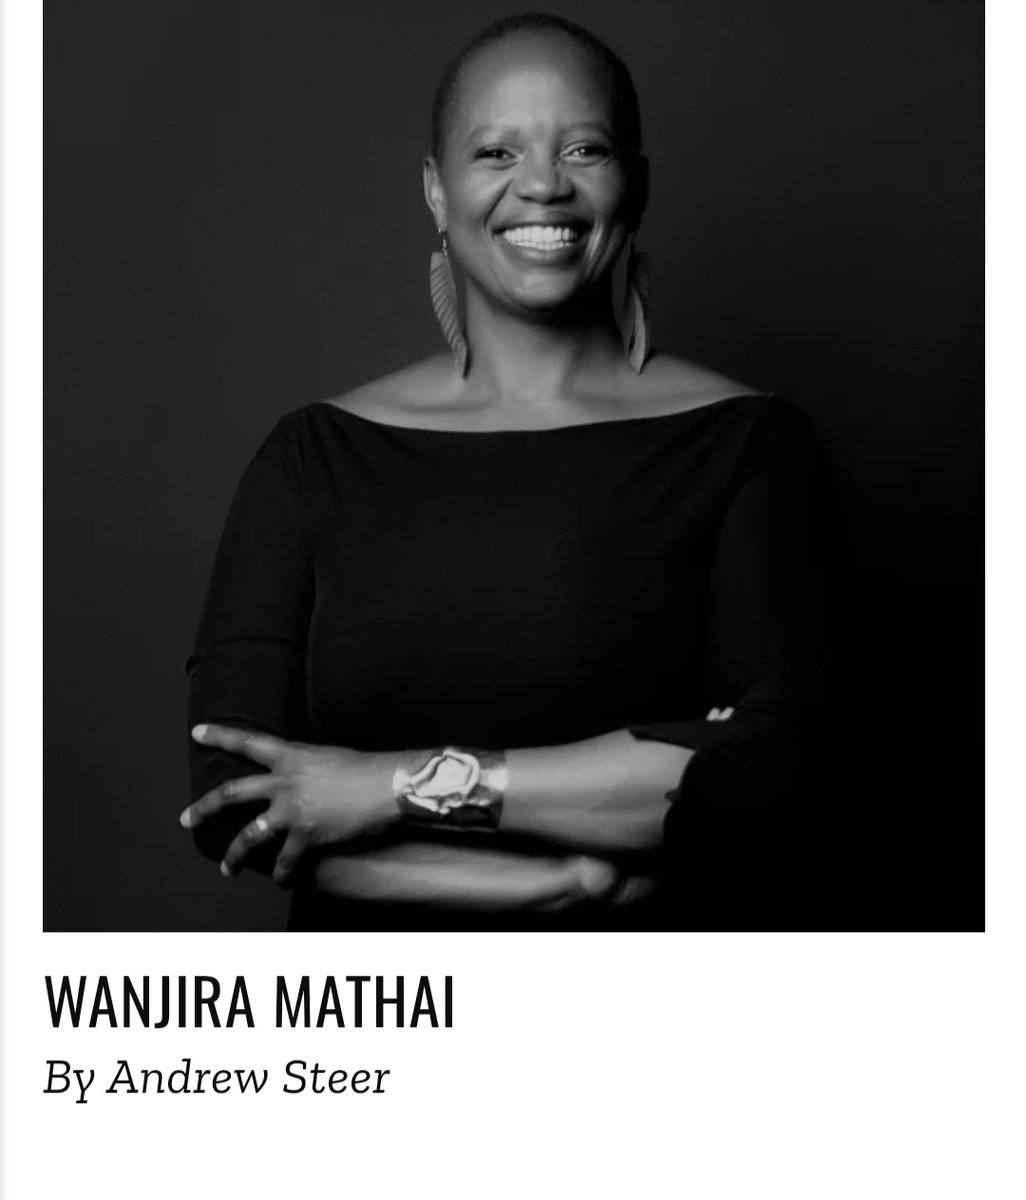 Congratulations to our Chair, @MathaiWanjira for making it to TIME's annual list as one of the 100 most influential people of 2023. #times100mostinfluentialpeople #Times100 time.com/collection/100…